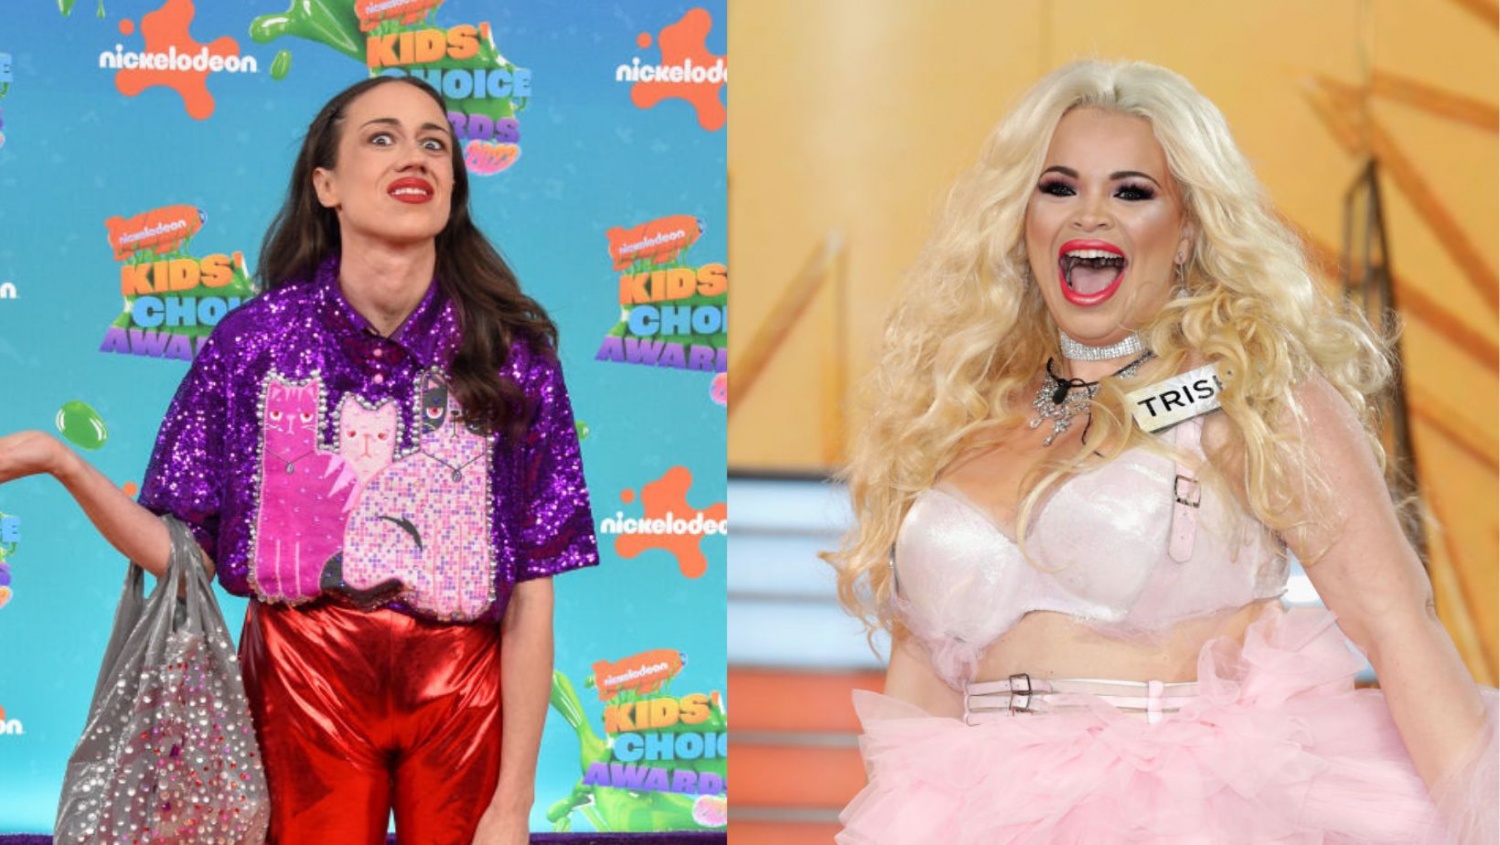 Is Colleen Ballinger Officially OVER? Youtuber's Podcast with Trisha Paytas, Miranda Sings Tour Canceled